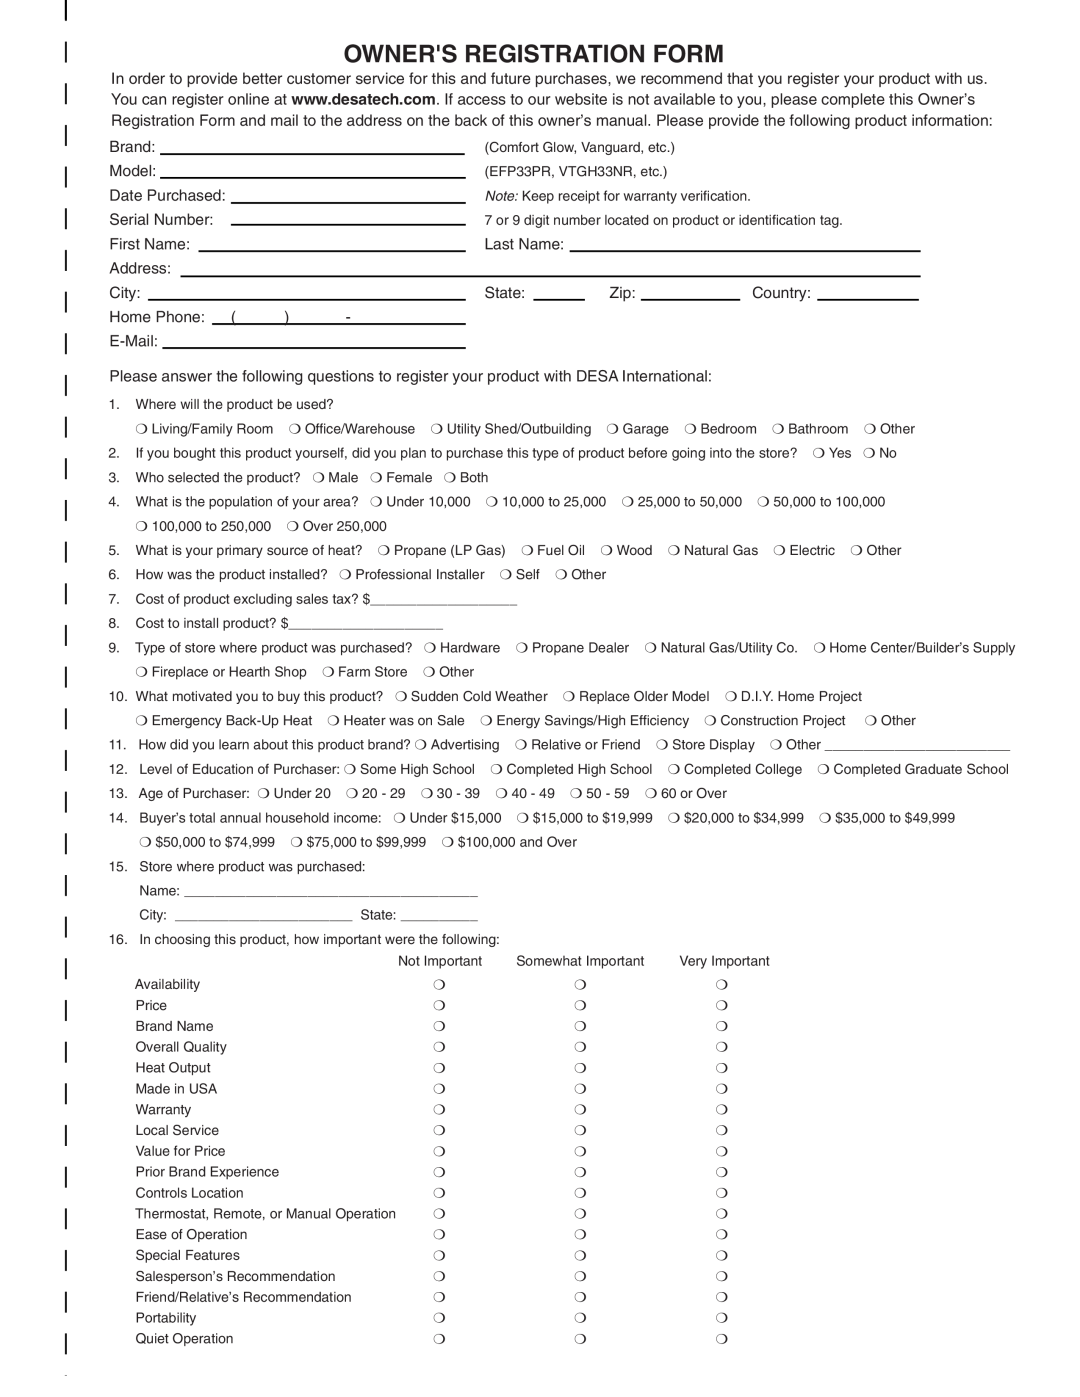 Desa INTERNATIONAL UNVENTED (VENT-FREE) GAS LOG HEATER installation manual Owners Registration Form 